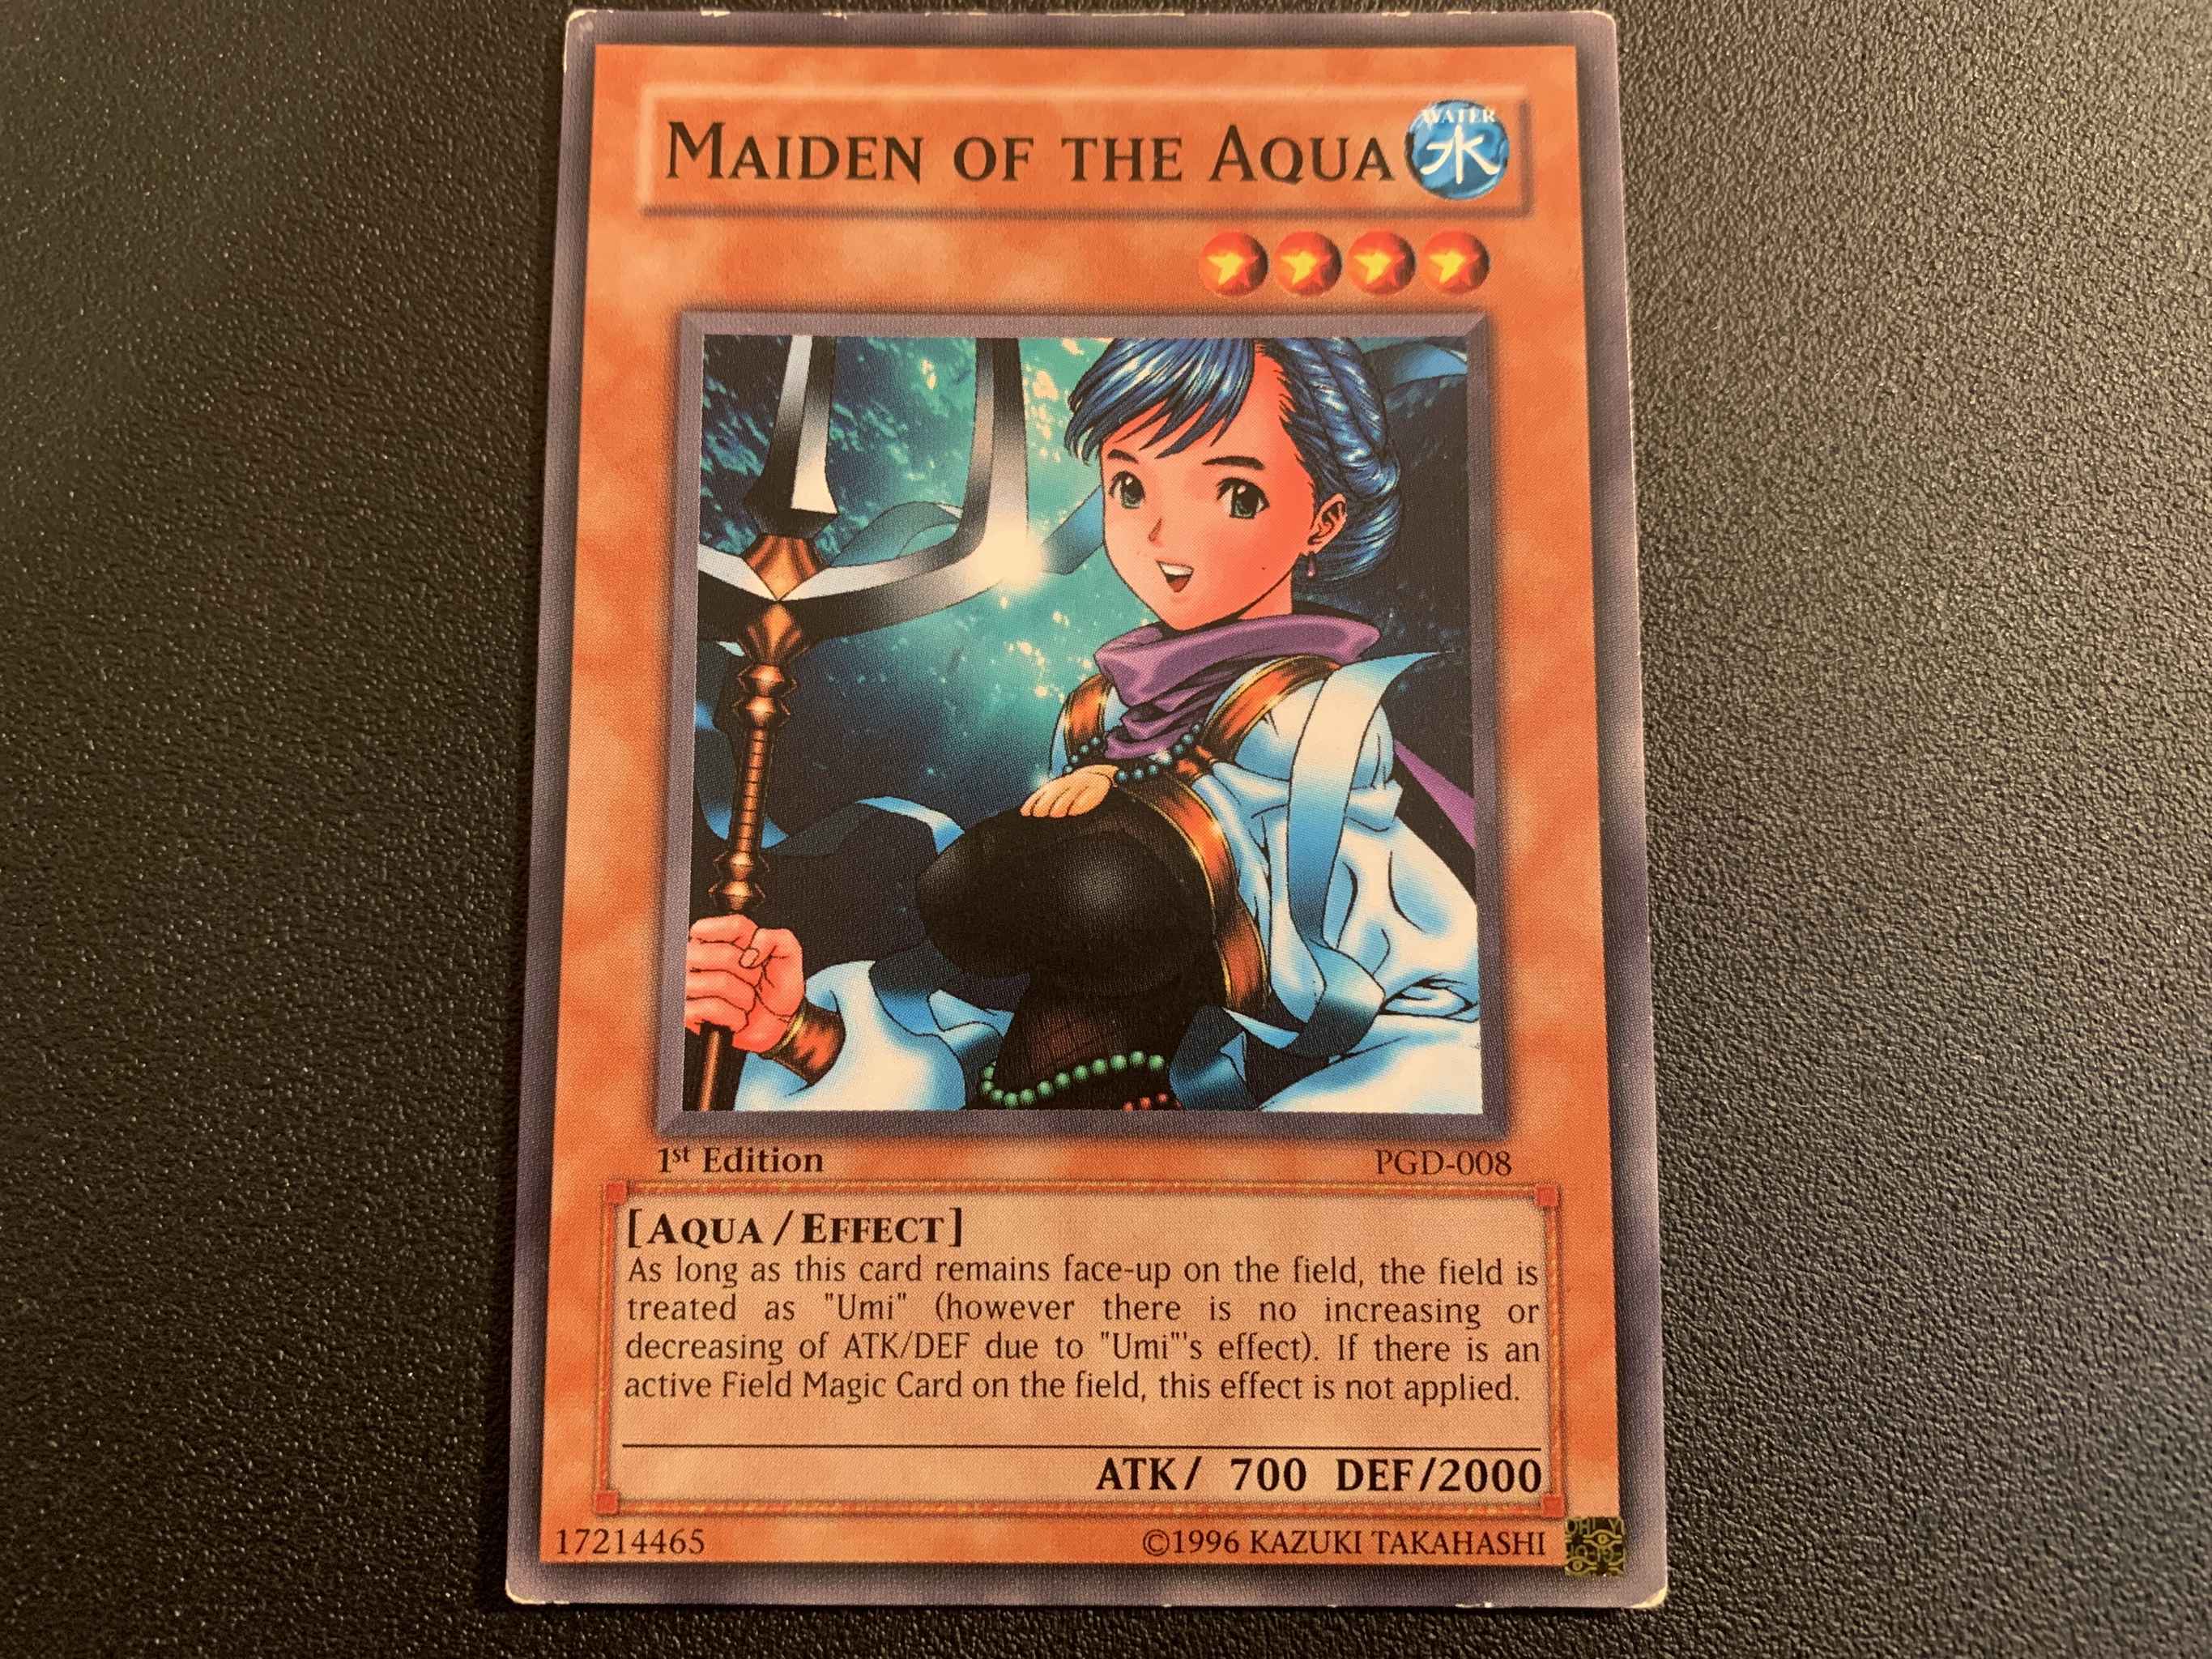 1st/Unlimited Edition PGD-008 Maiden of the Aqua Yu-Gi-Oh NM/EX Common 